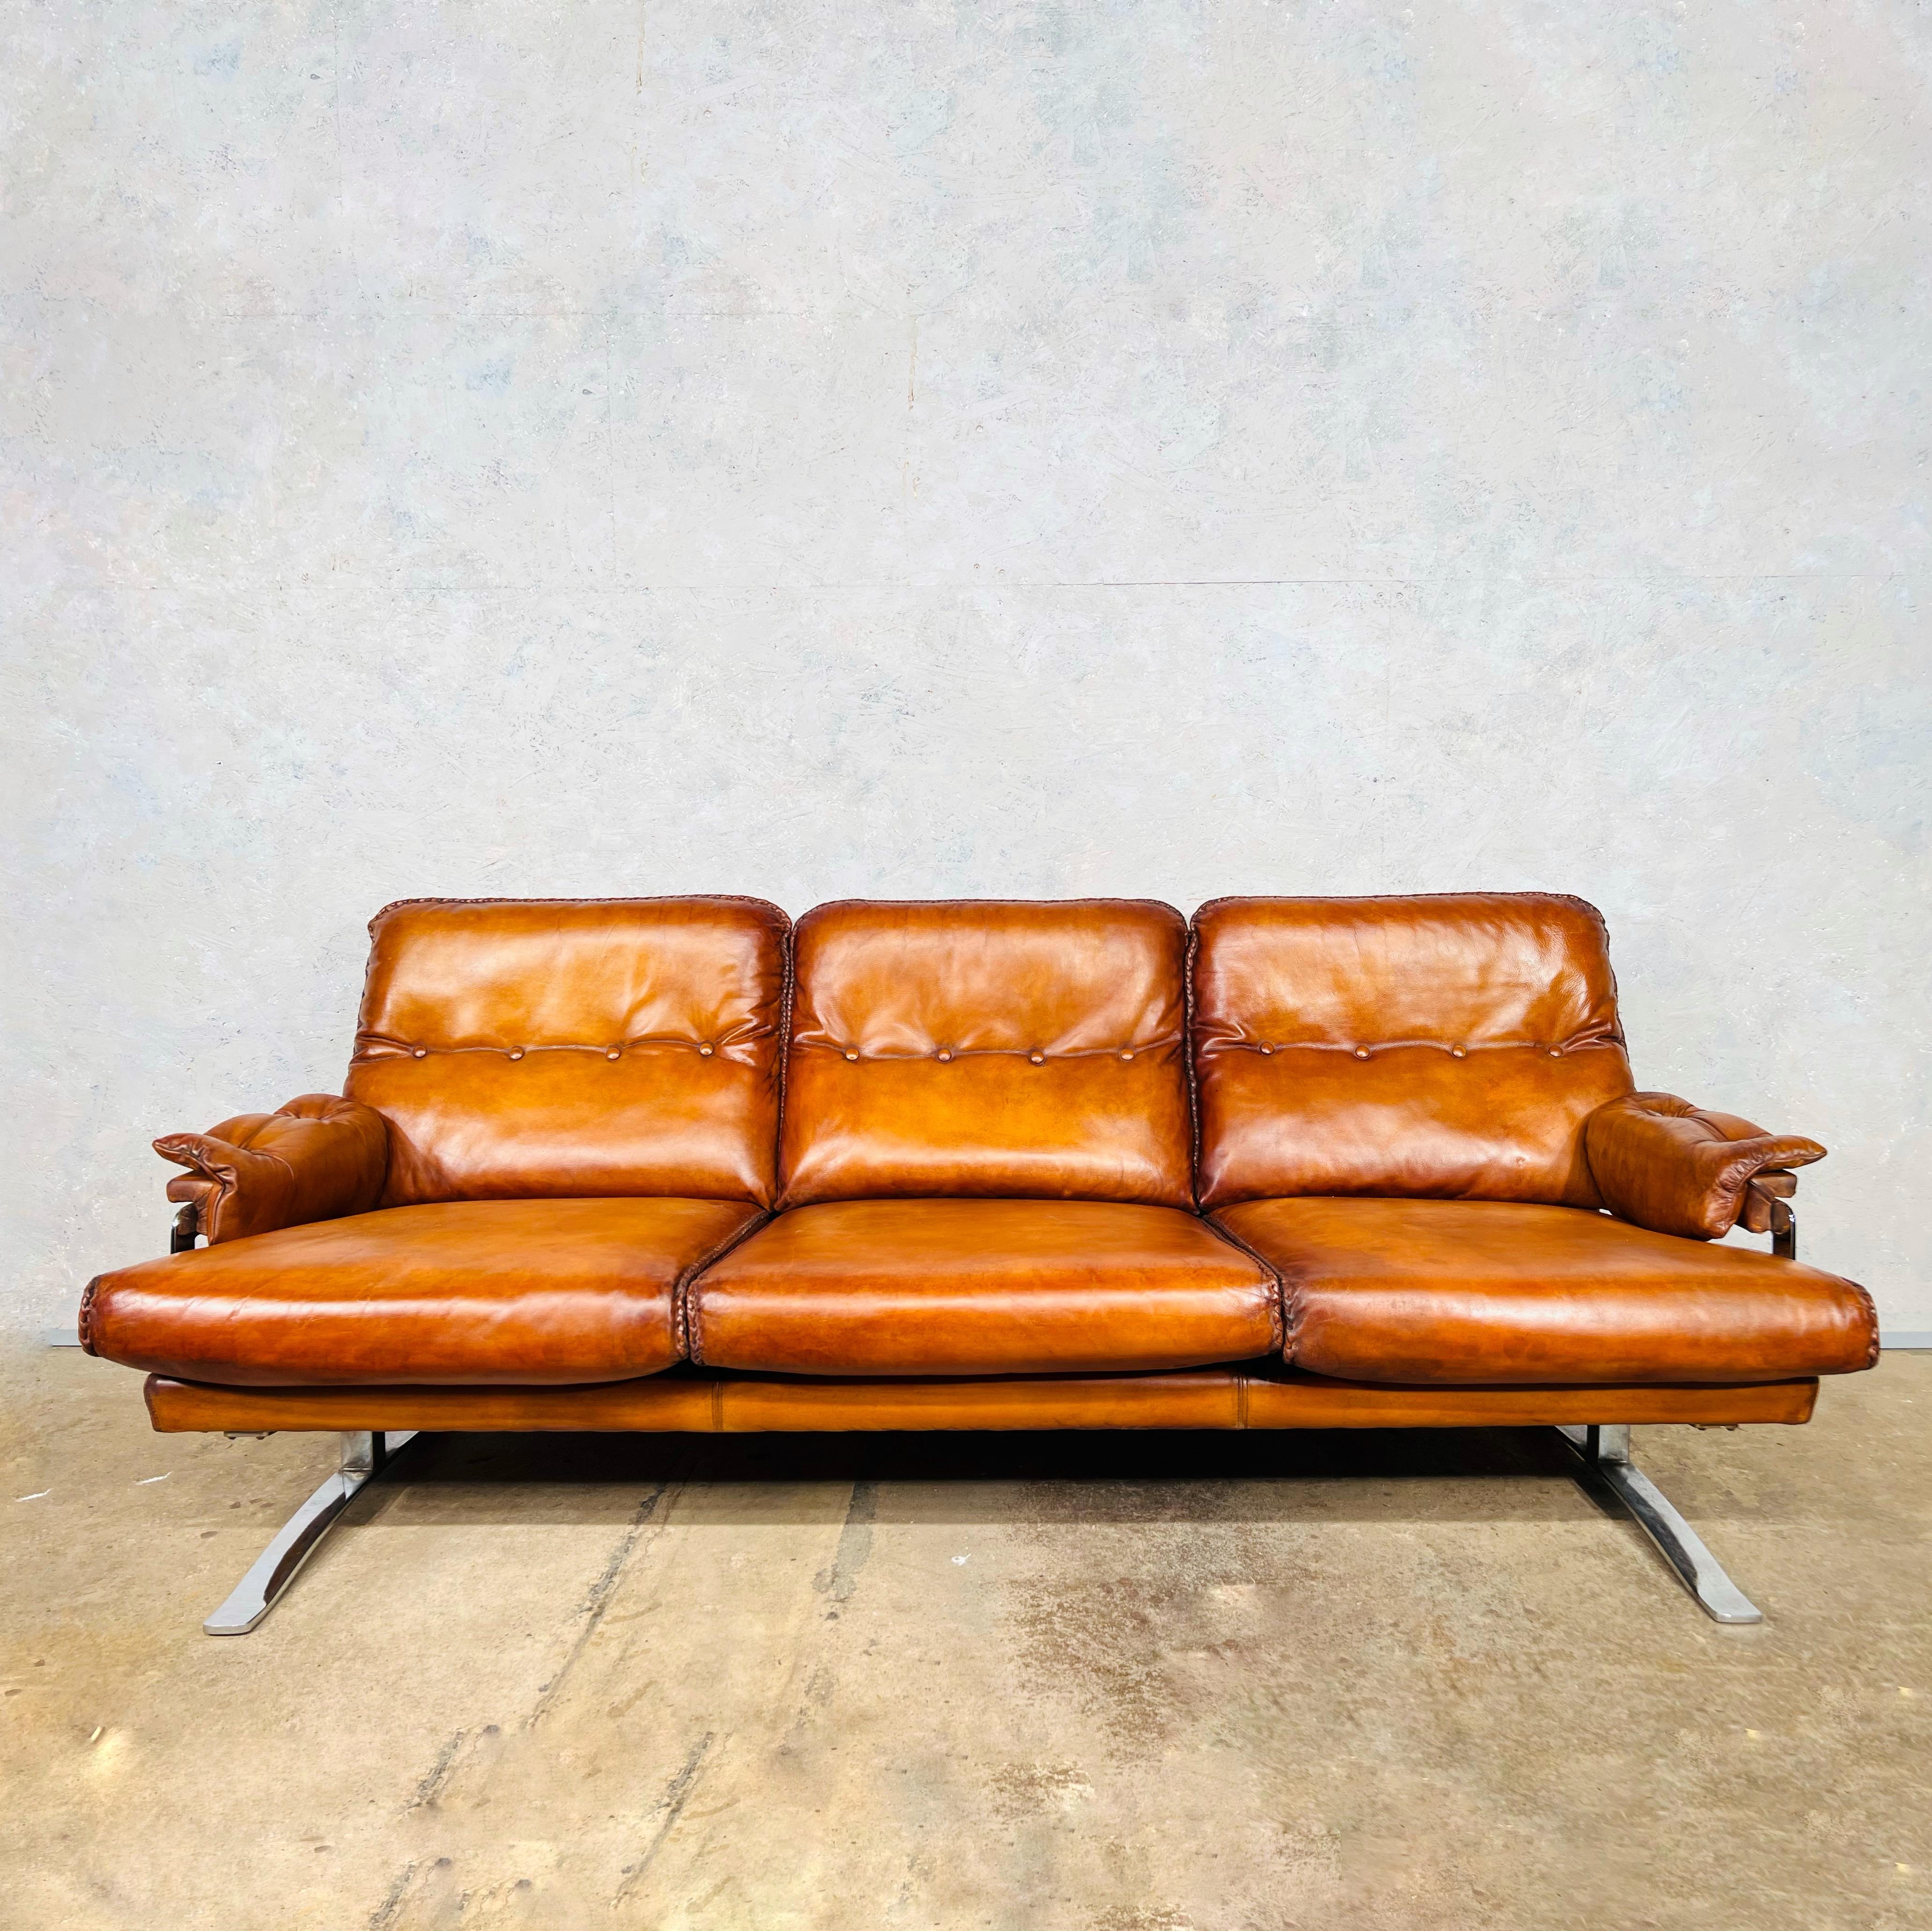 Vintage 1970s 3 seater leather sofa by Swedish designer Arne Norell in a Light Tan Color.
Great design with beautiful lines. 

The leather is a Stunning hand dyed Light Tan colour and has a great patina and finish.

It is resting on solid